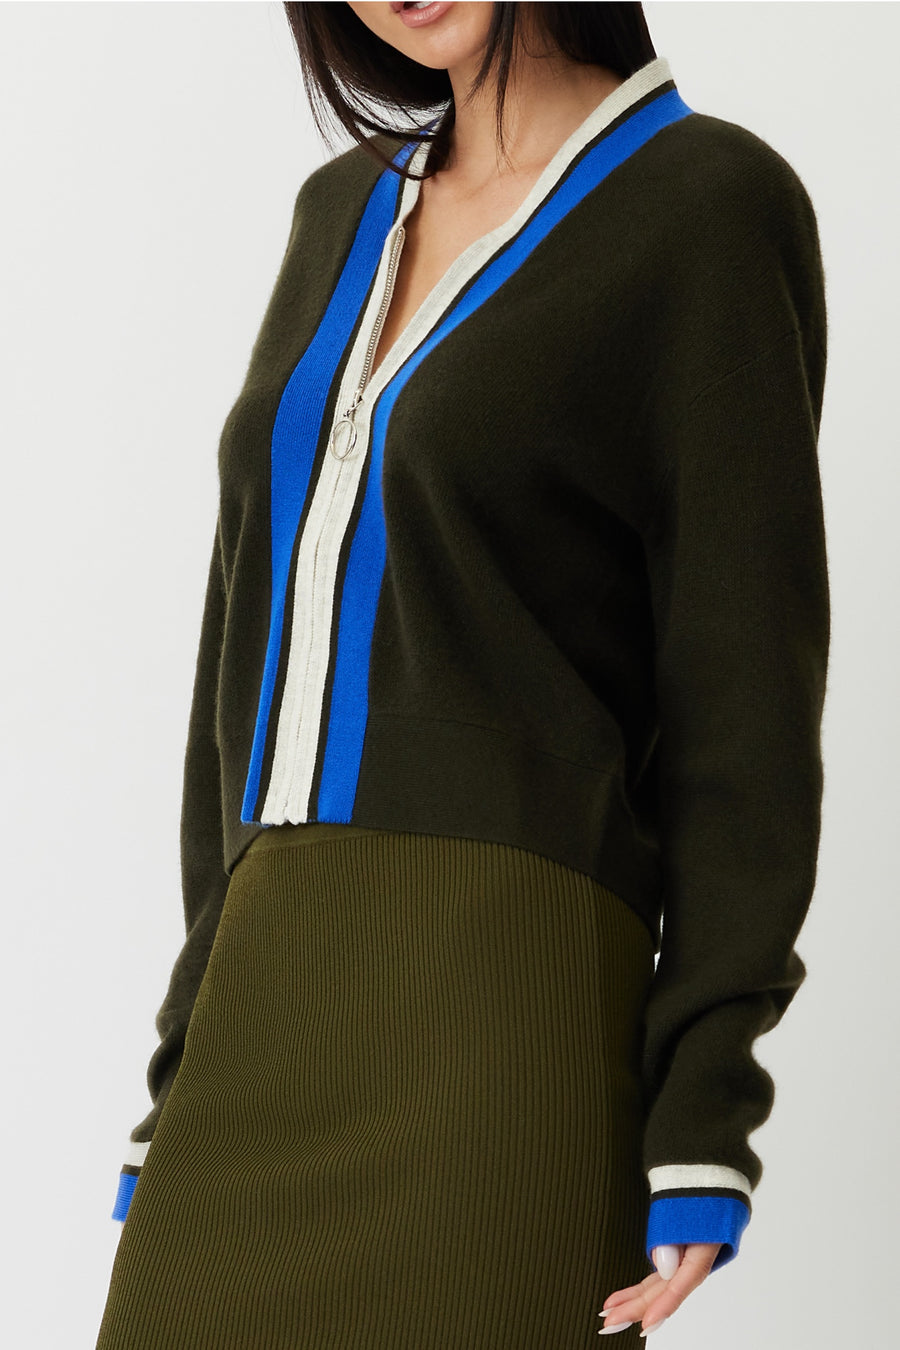 THE HOLBROOK CASHMERE BLEND ZIP CARDIGAN - ARMY